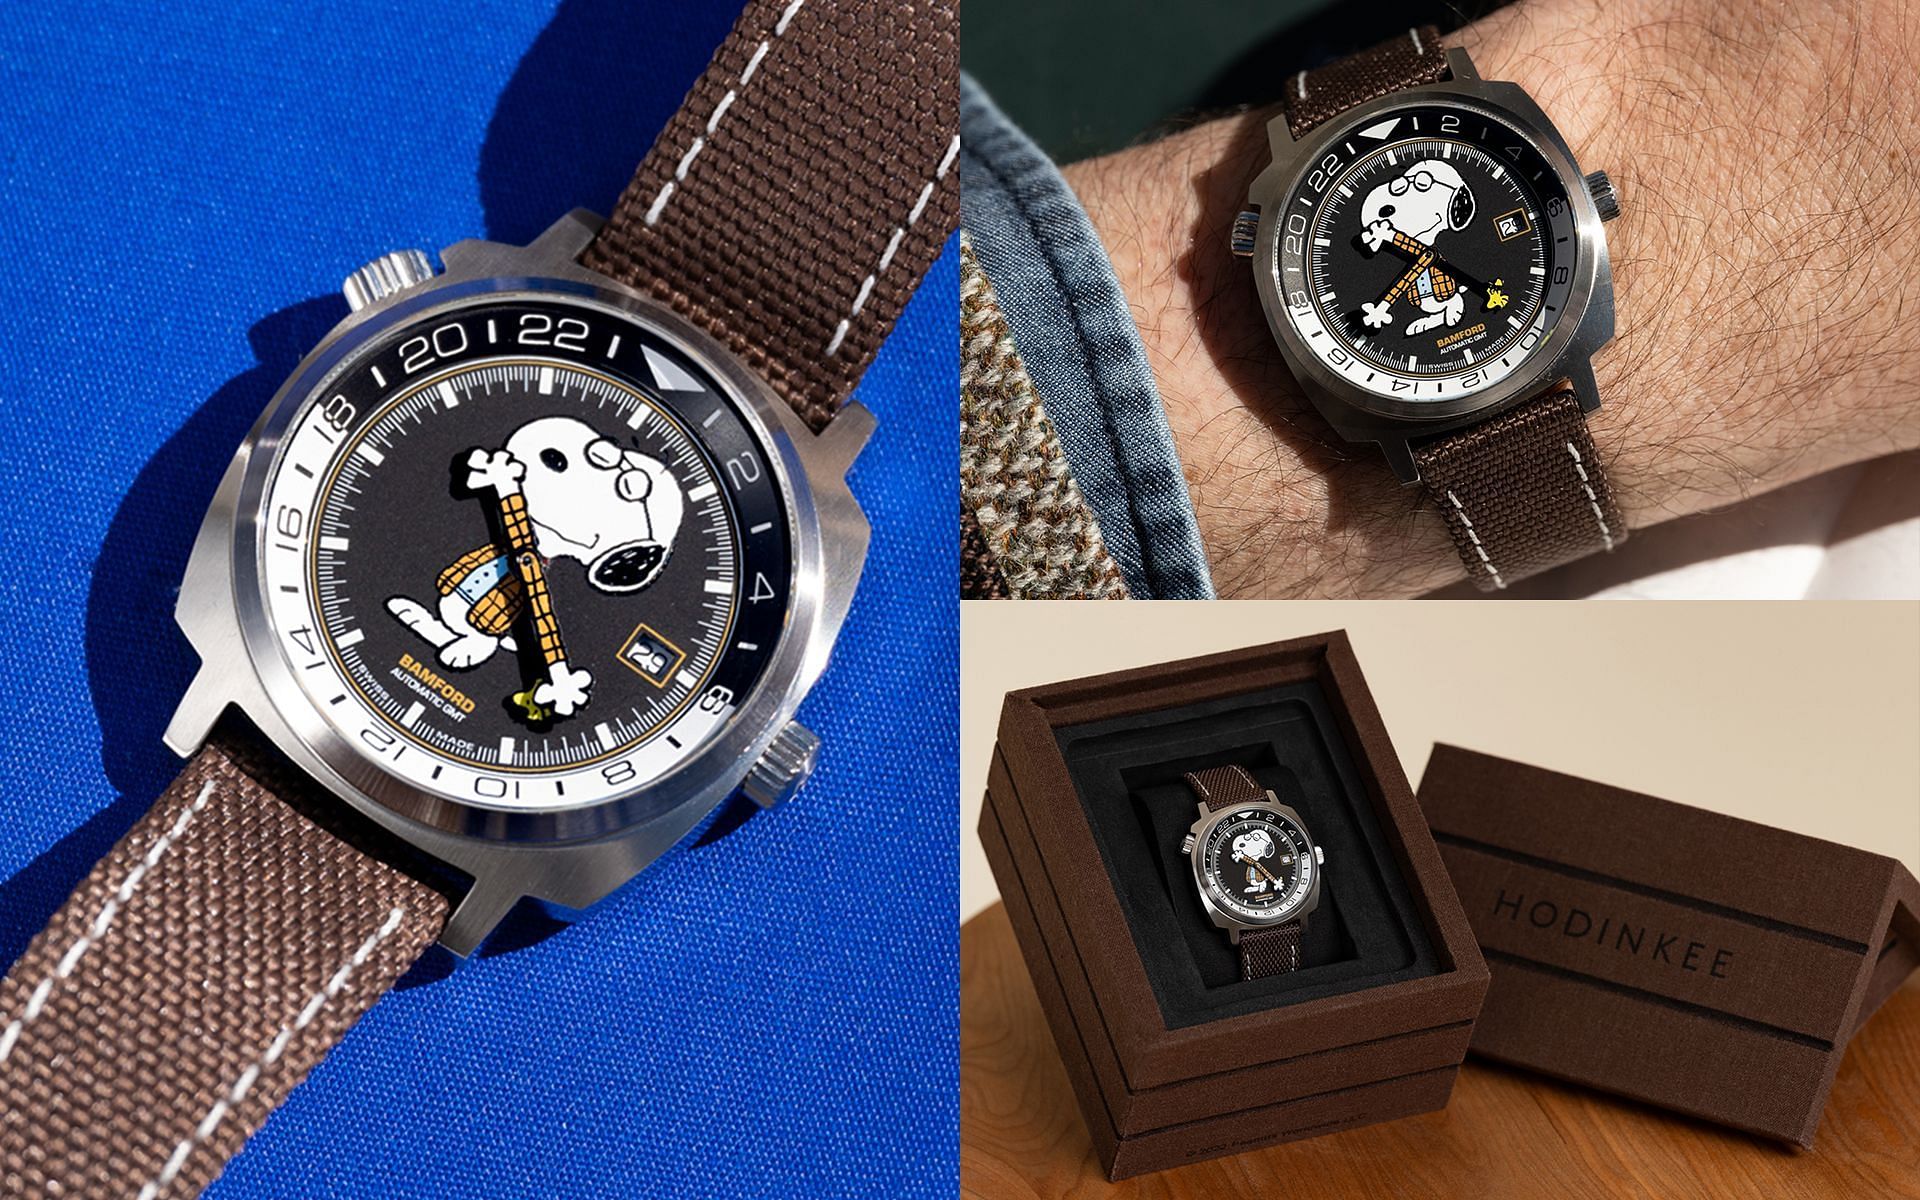 Hodinkee x Bamford London together launched Peanuts &quot;Joe Preppy&quot; GMT limited edition timepieces (Image via Sportskeeda)